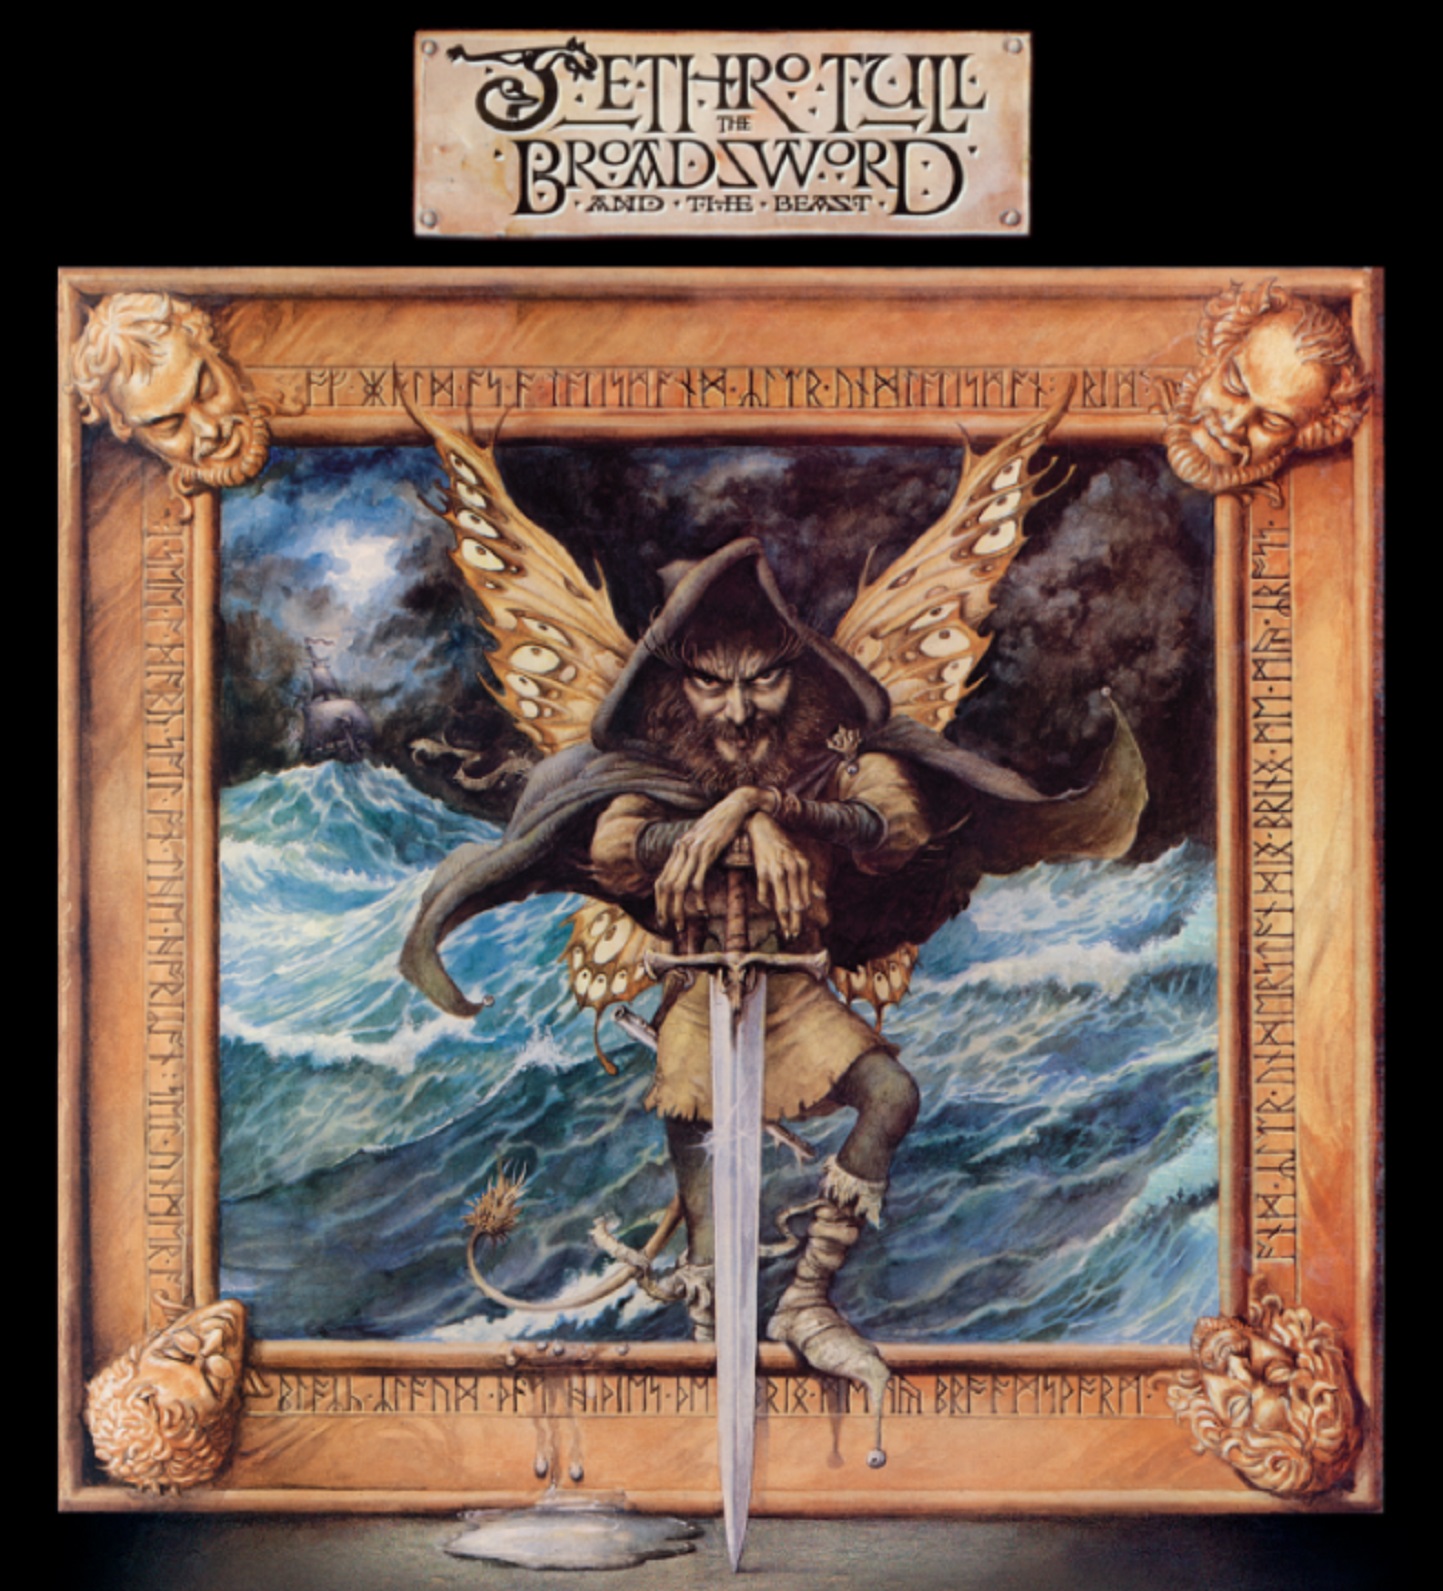 JETHRO TULL'S "THE BROADSWORD AND THE BEAST" TURNS 40: INTRODUCING THE MONSTER EDITION!